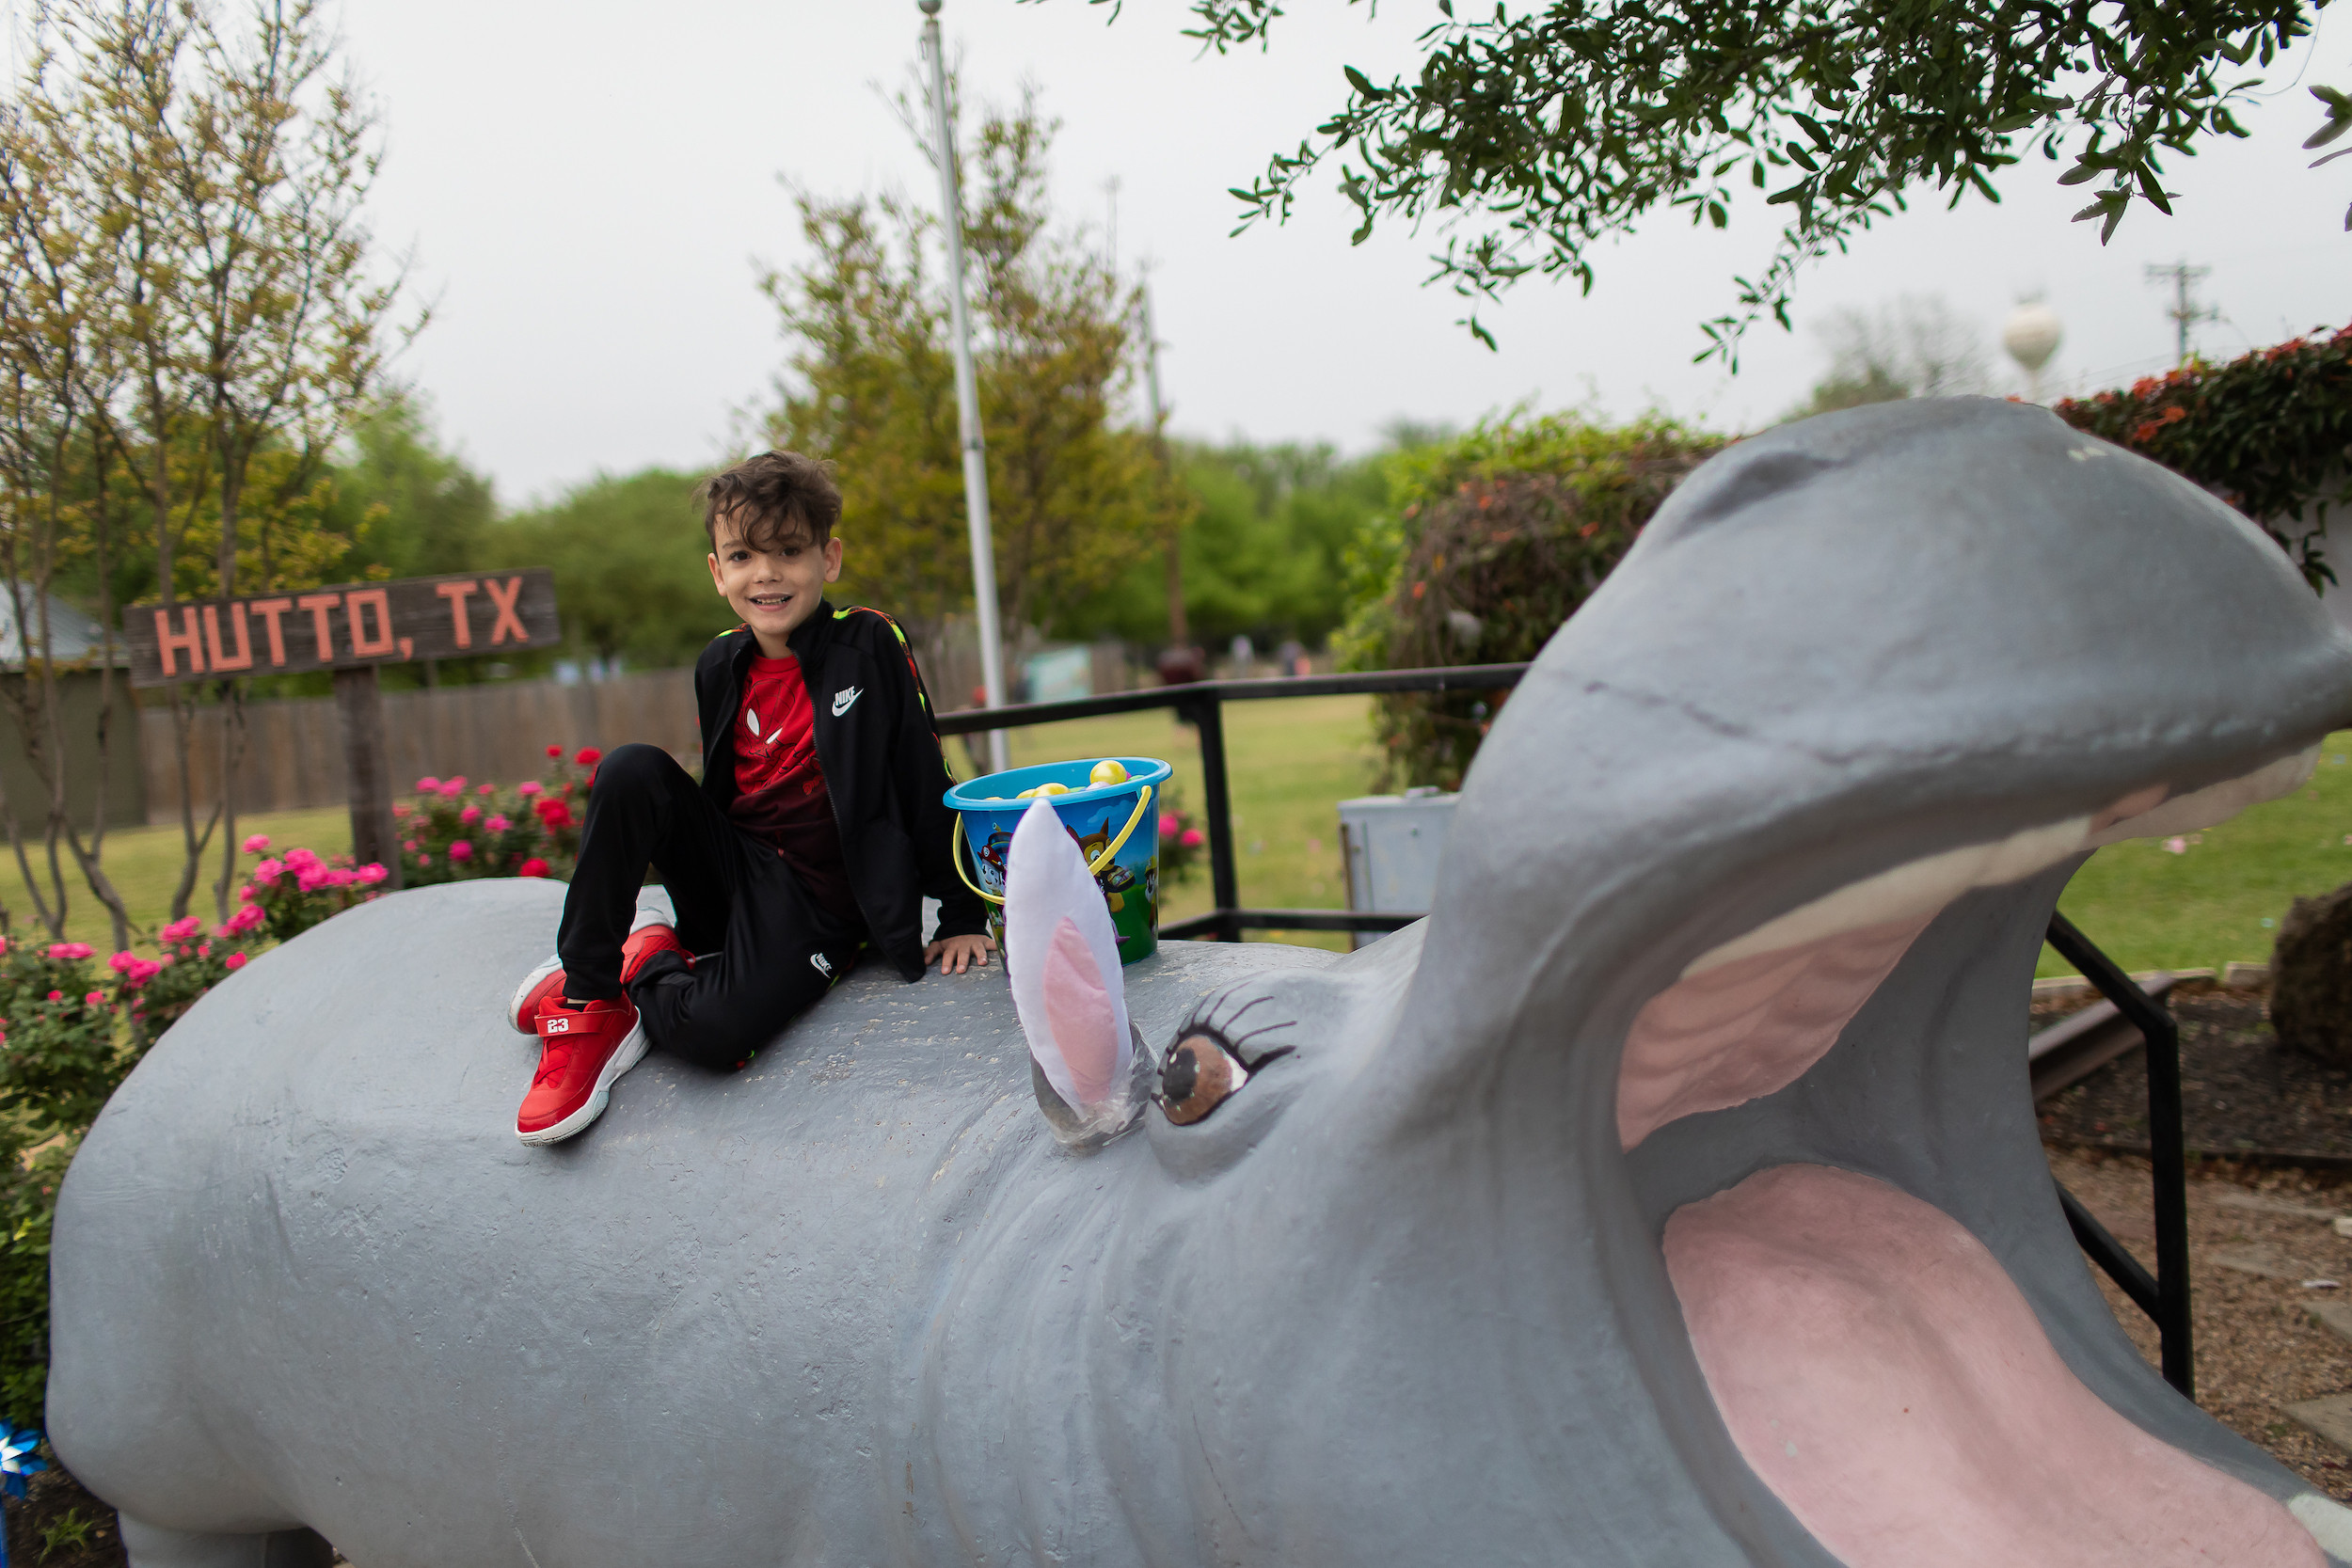 Photo of a child sitting with an Easter basket on a large concrete hippo with a Hutto, TX sign in the background